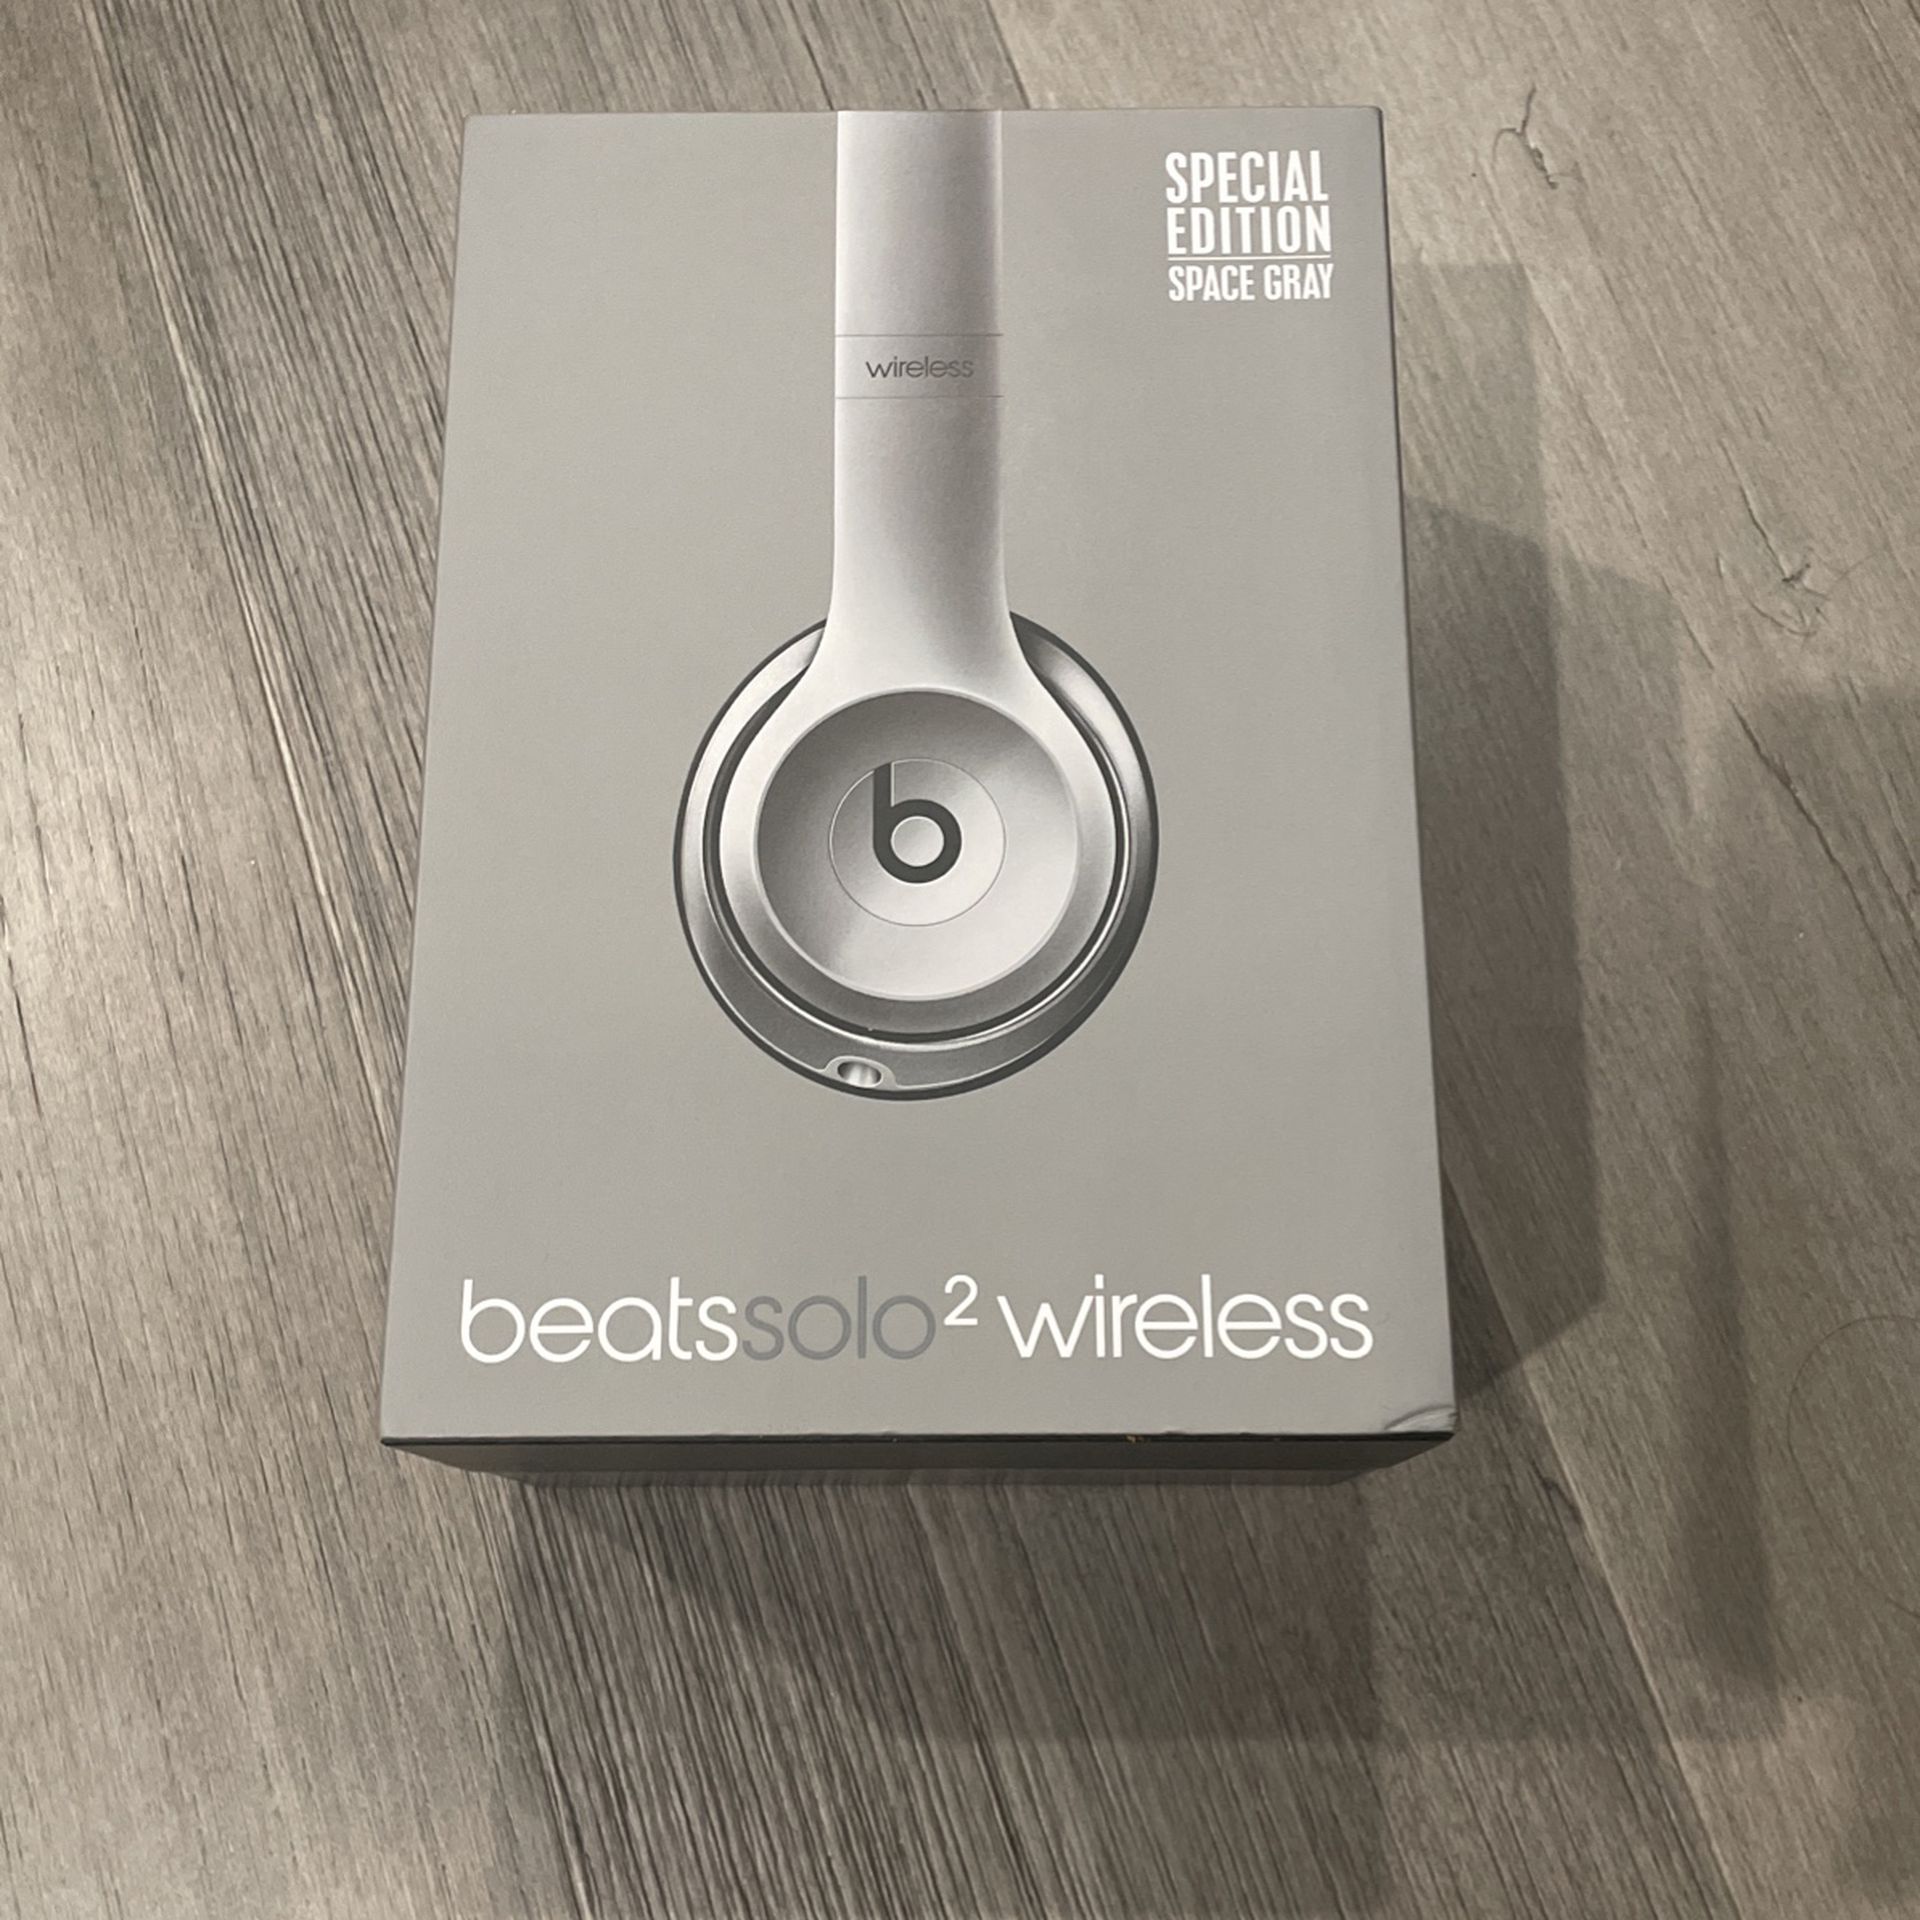 Beats Solo2 wireless SPECIAL EDITION Space Gray